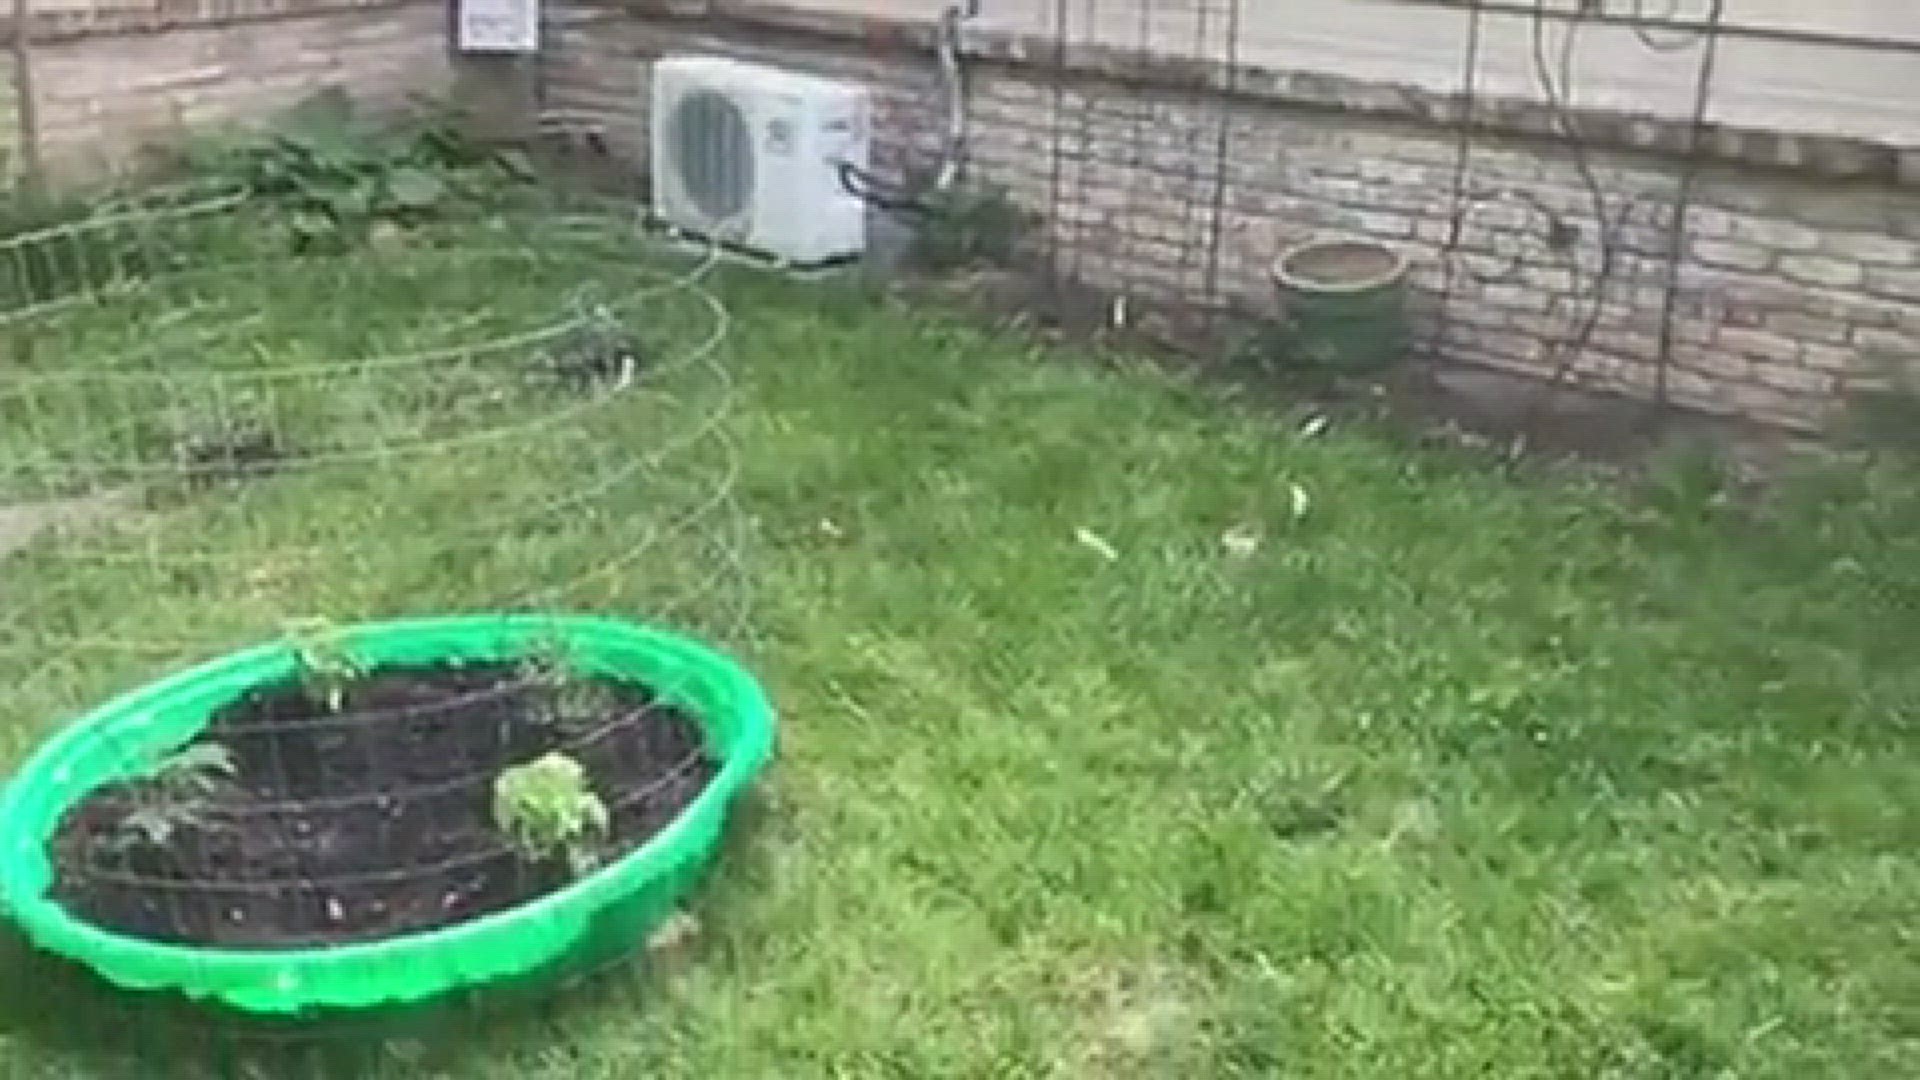 Turning a side yard into a garden - used an old kiddie pool for one tomato/basil bed and put in tomato cages.
Credit: Victoria D.